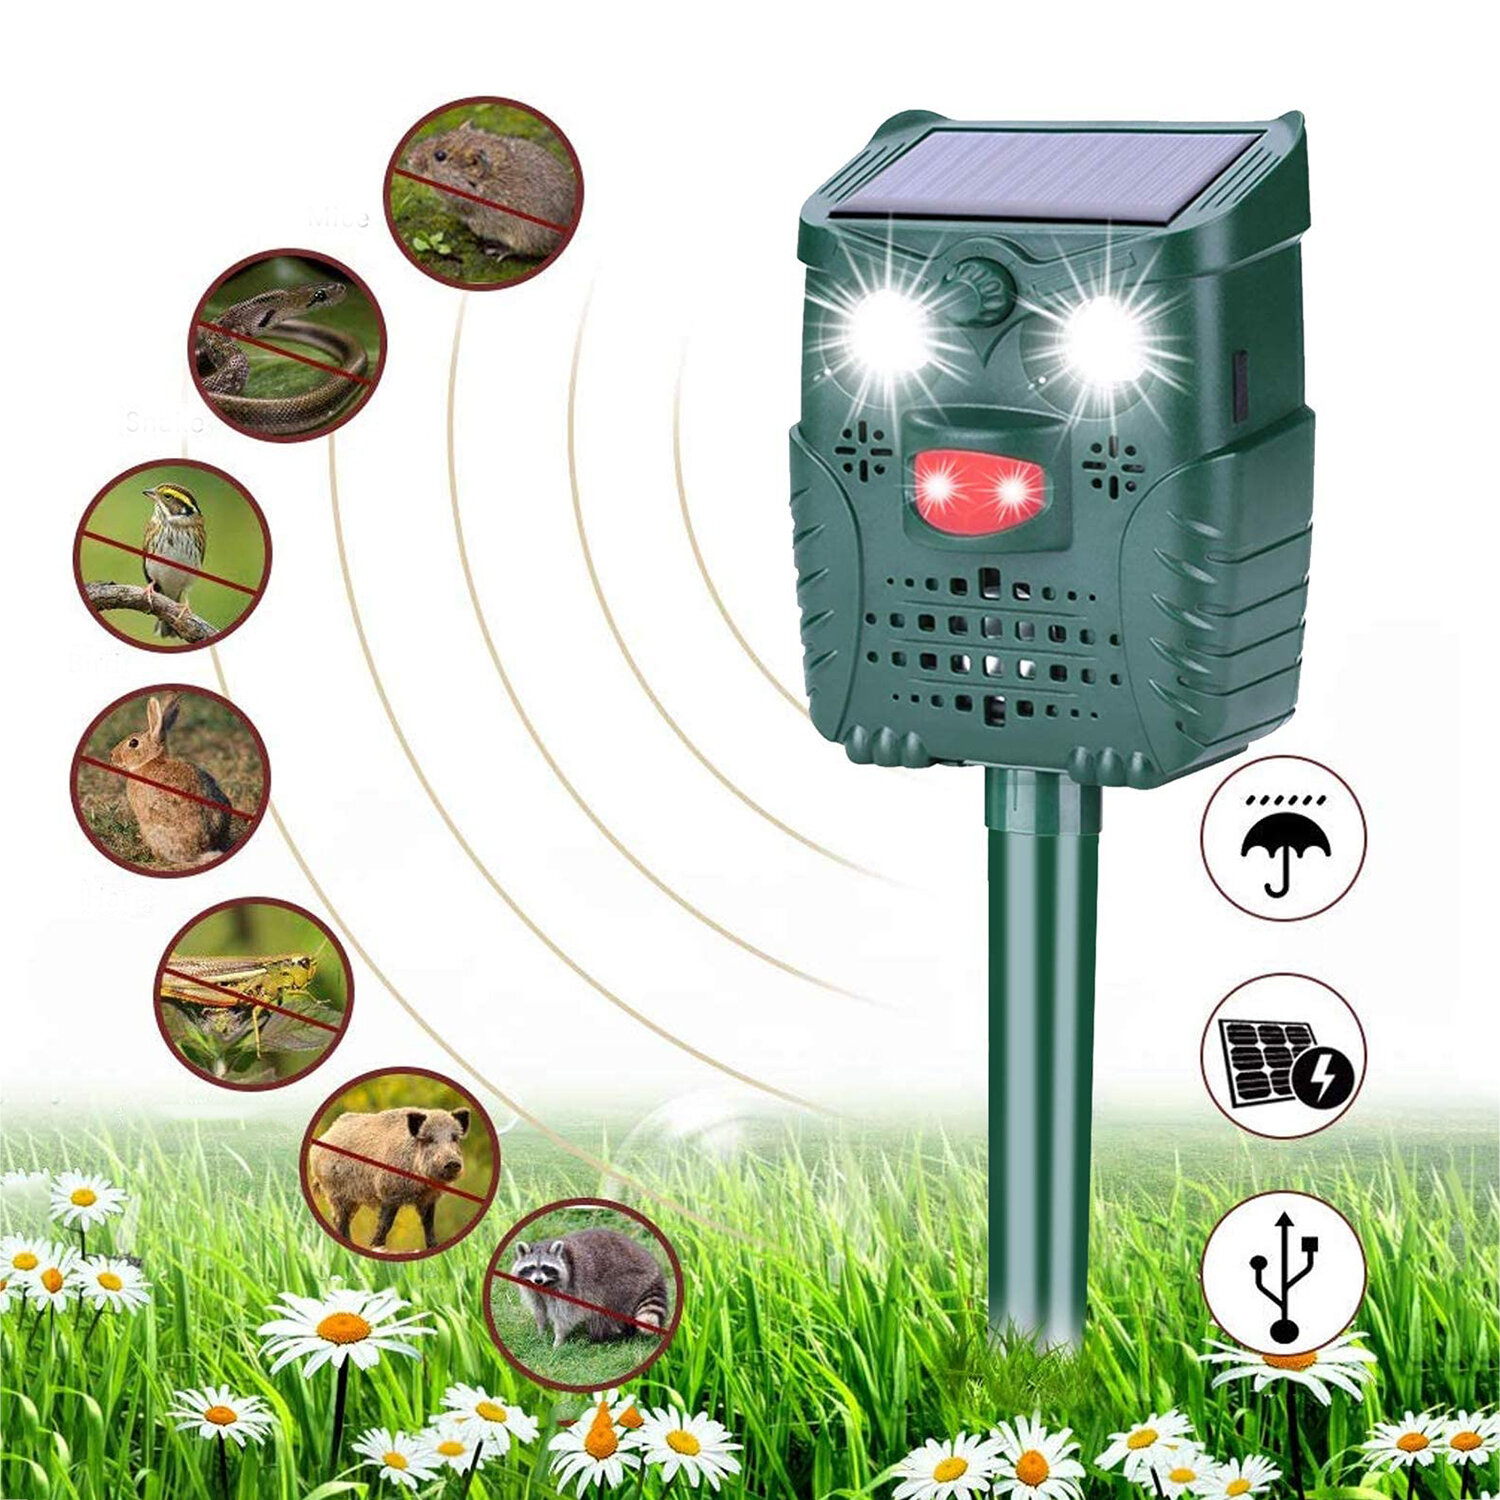  WH528 Outdoor Solar Ultrasonic Animal Repeller Pest Control Bats Birds Dogs Cats Repeller with Flashing Light